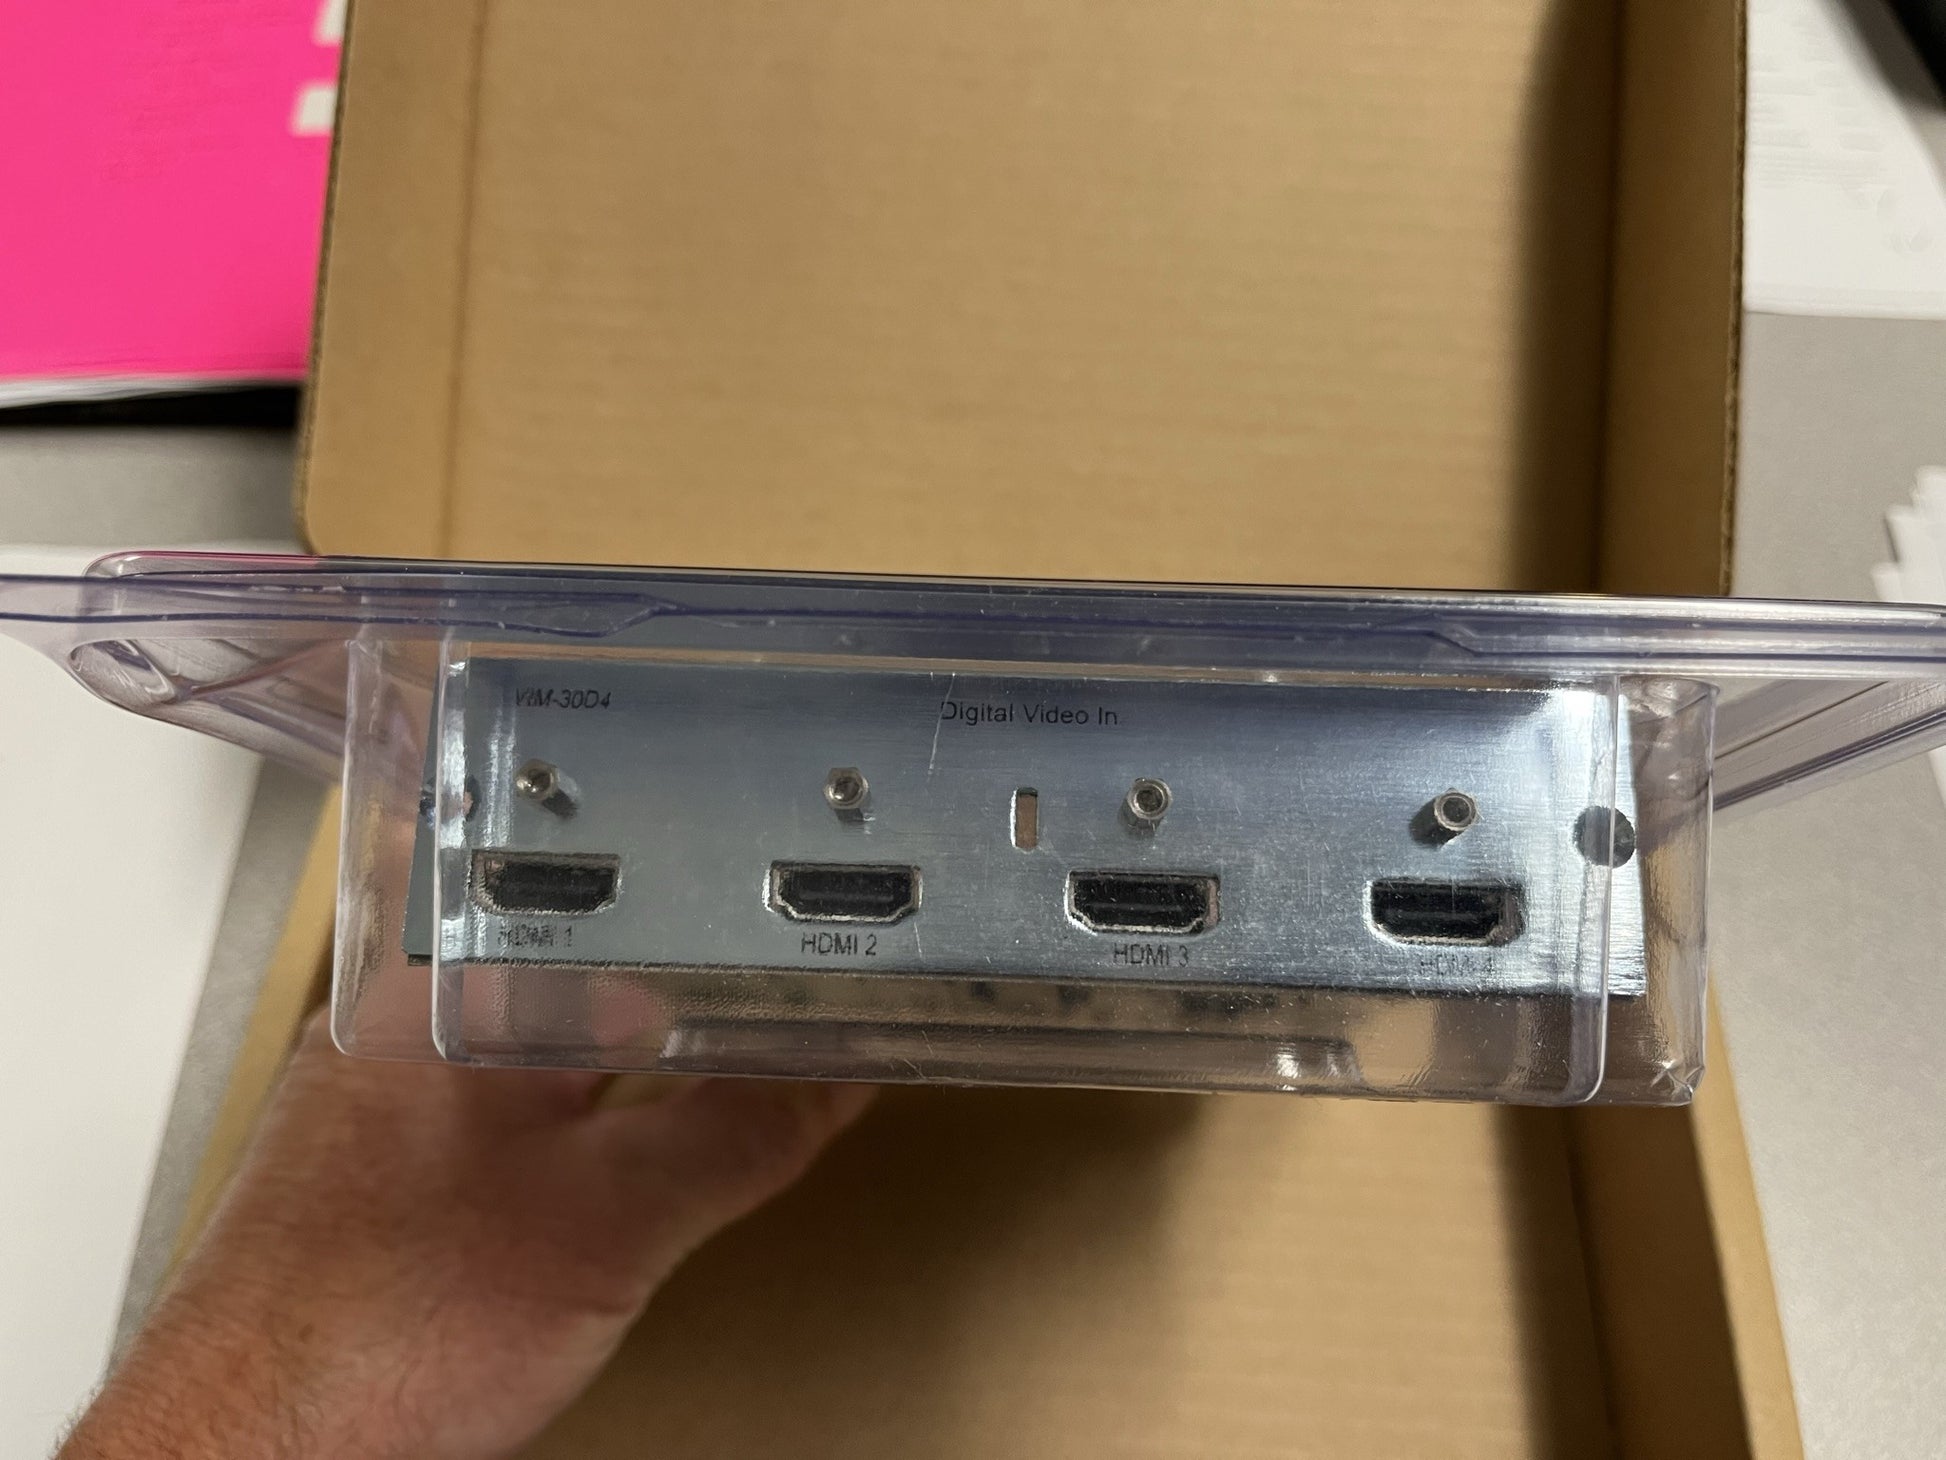 New Savant Digital Video Input Module, VIM-30D4 in Open Box for Sale. We Sell Professional Audio Equipment. Audio Systems, Amplifiers, Consoles, Mixers, Electronics, Entertainment, Live Sound.